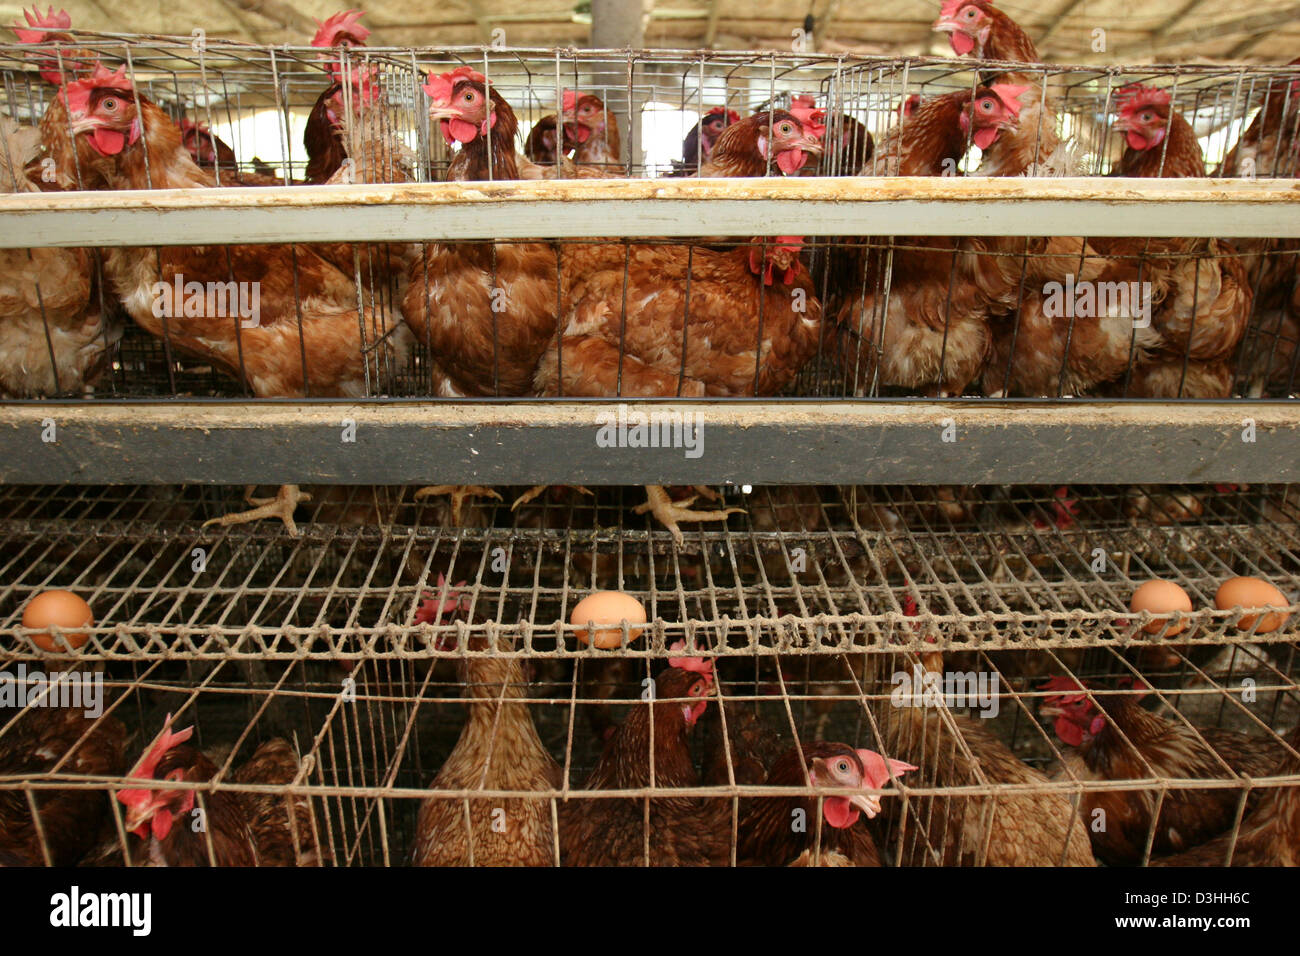 INDUSTRIALLY RAISED POULTRY Stock Photo